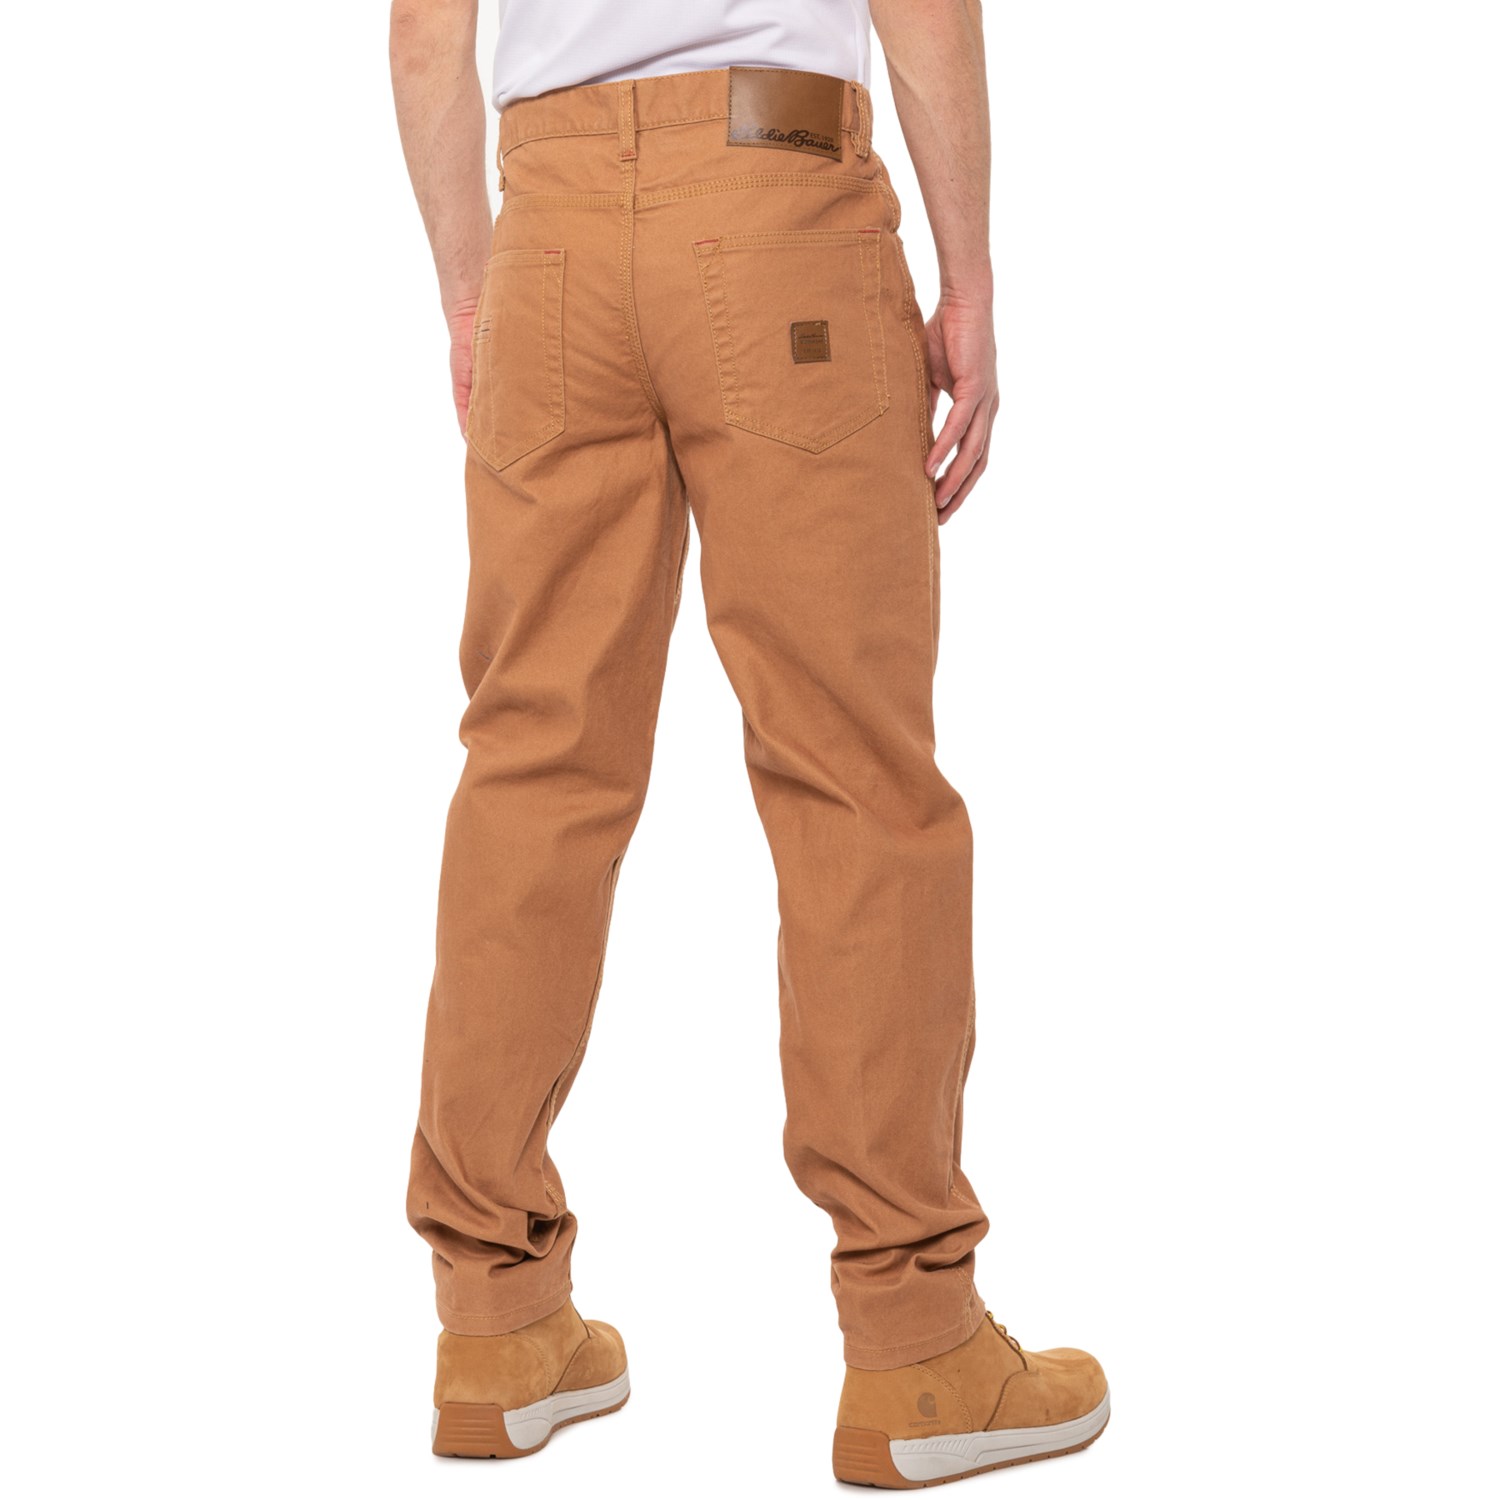 Eddie Bauer Workwear Workman Relaxed Fit Duck Pants (For Men) - Save 57%